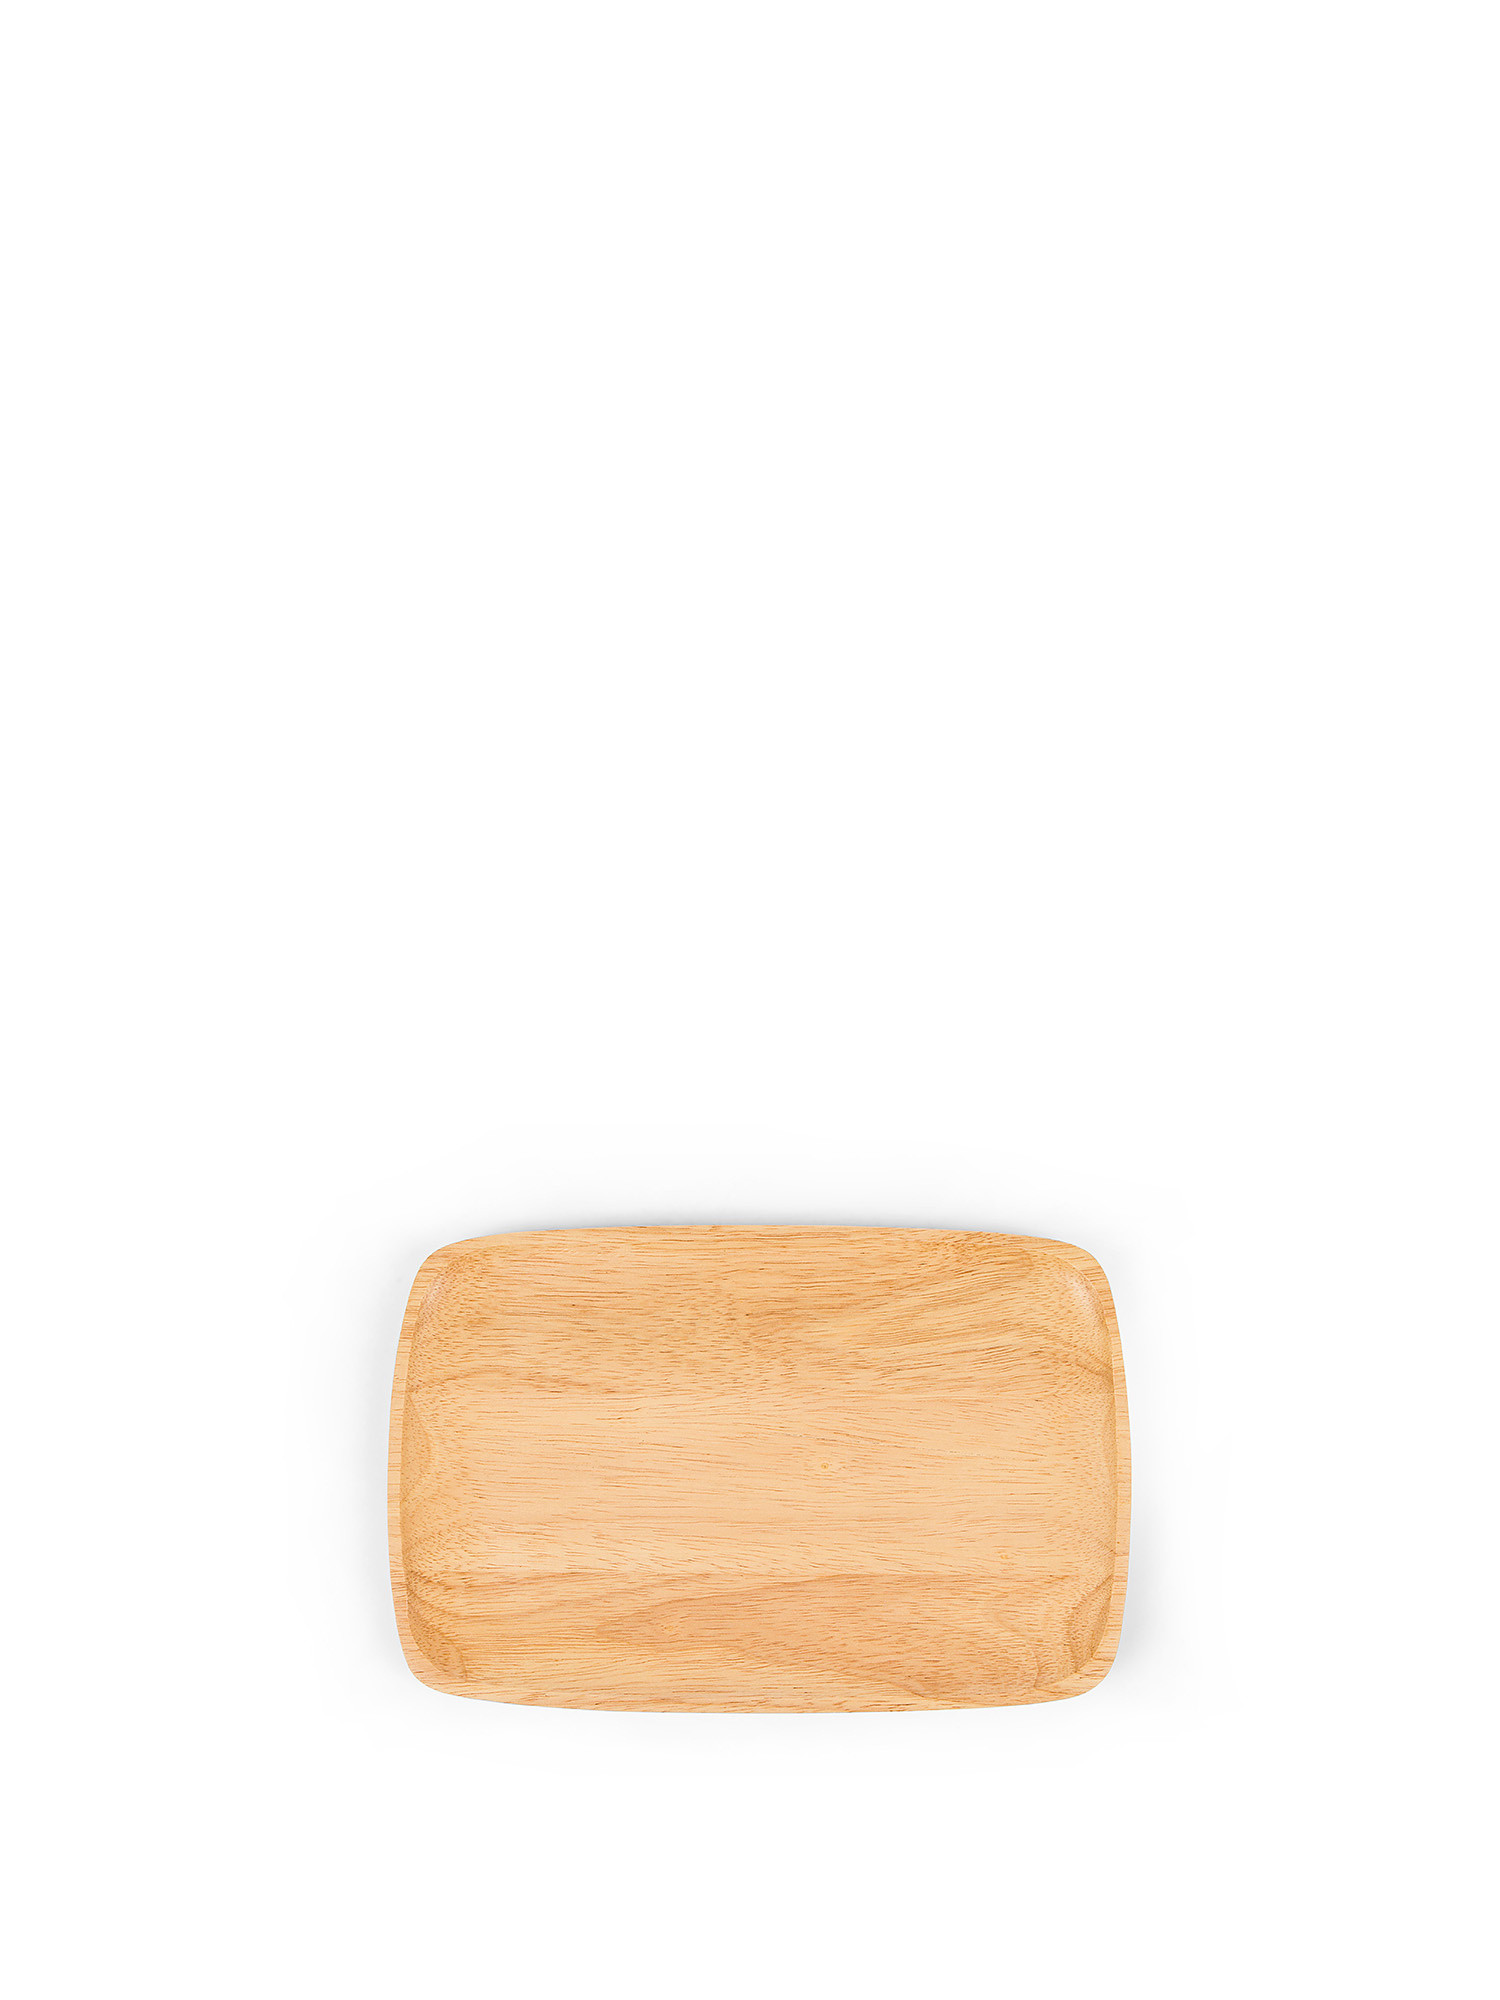 Rubber wood tray, Beige, large image number 0